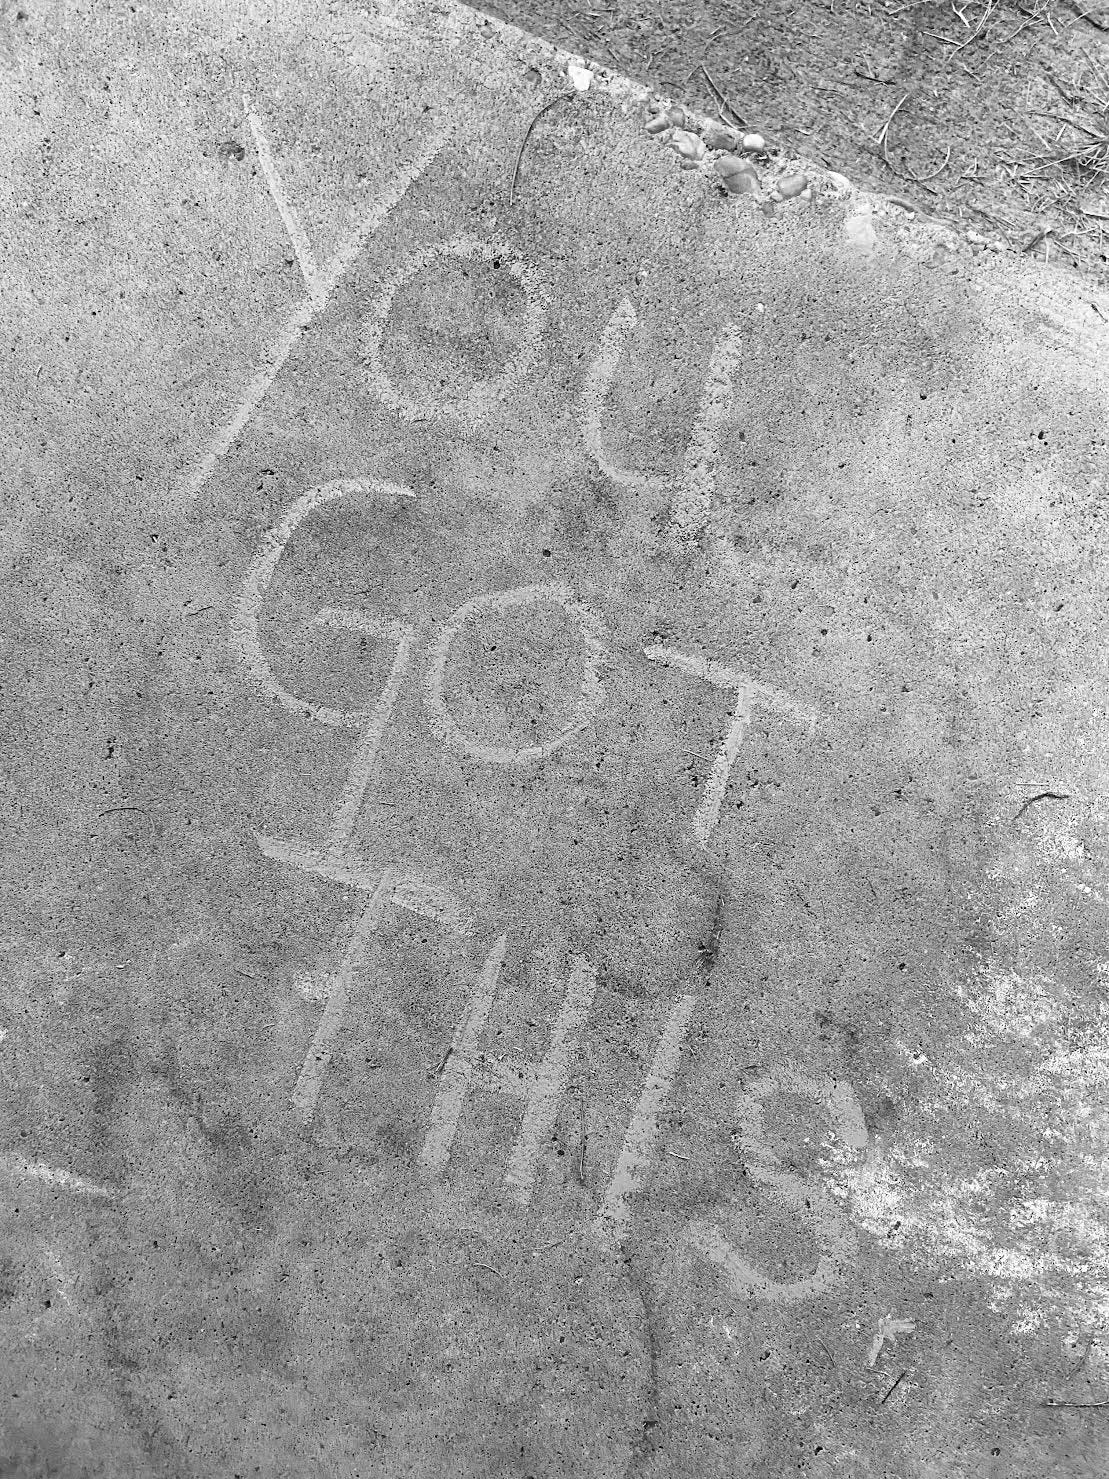 black and white photo - "you got this" written by chalk on concrete